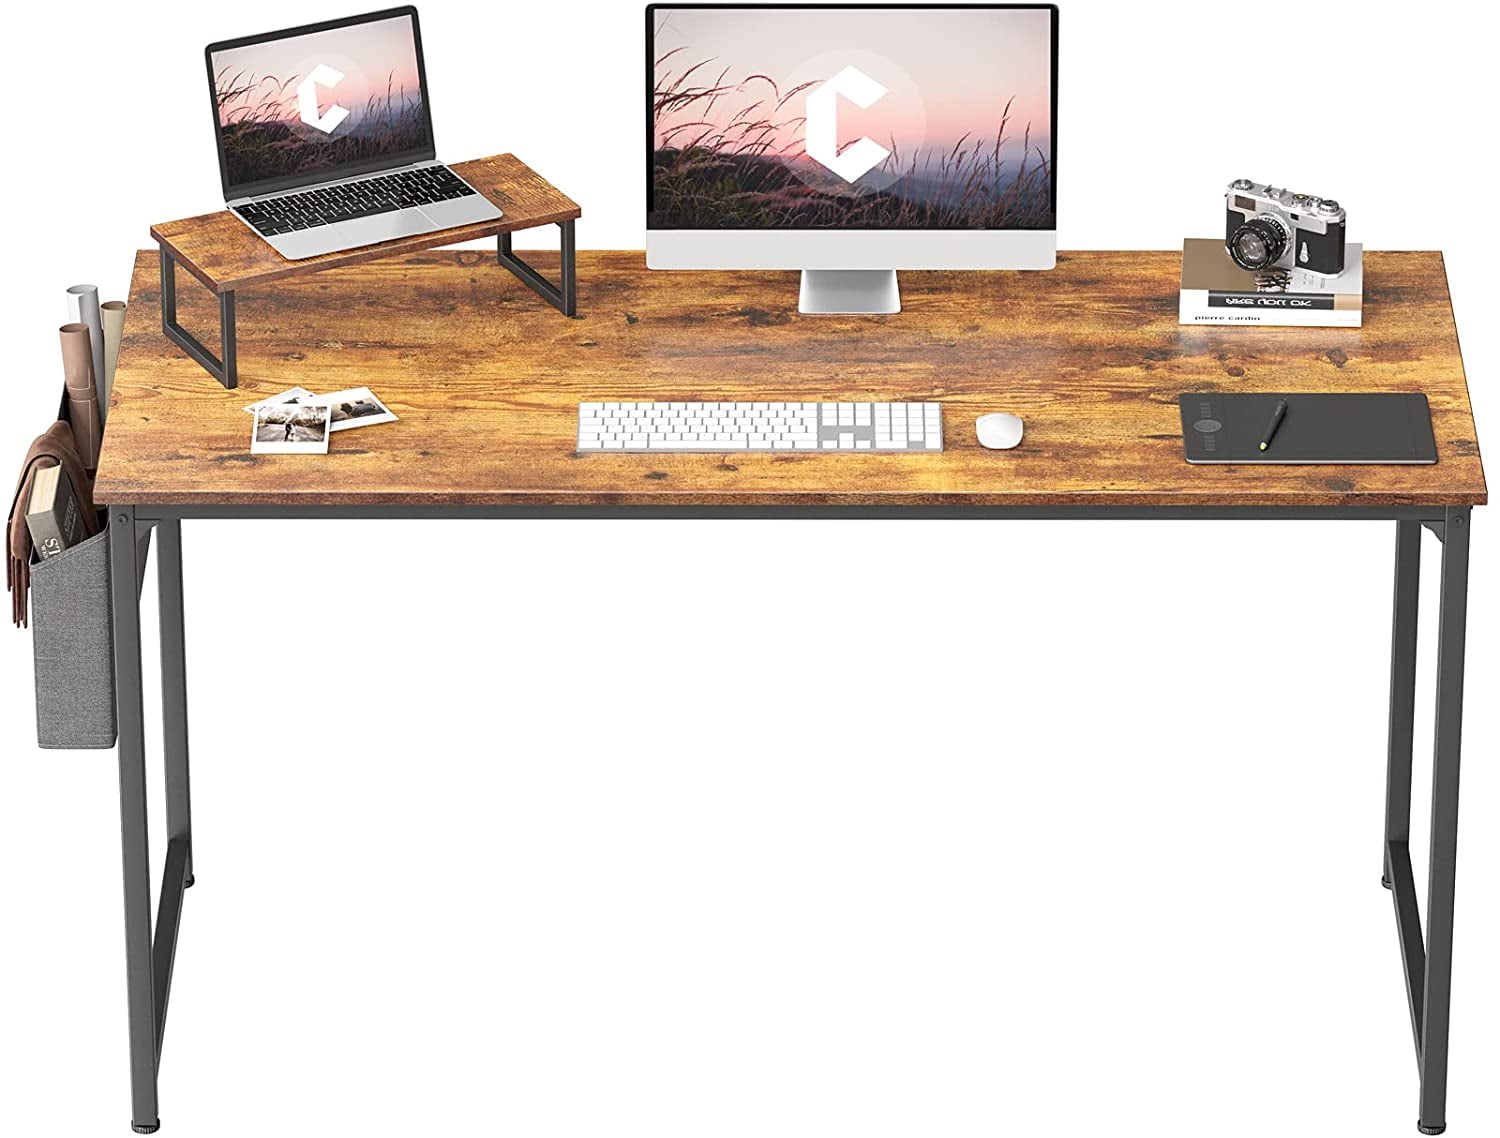 Desk Reclaimed Wood Industrial Rustic Desk Custom Table Scaffold Board  Furniture Small Large Computer Office Desk Home Study 